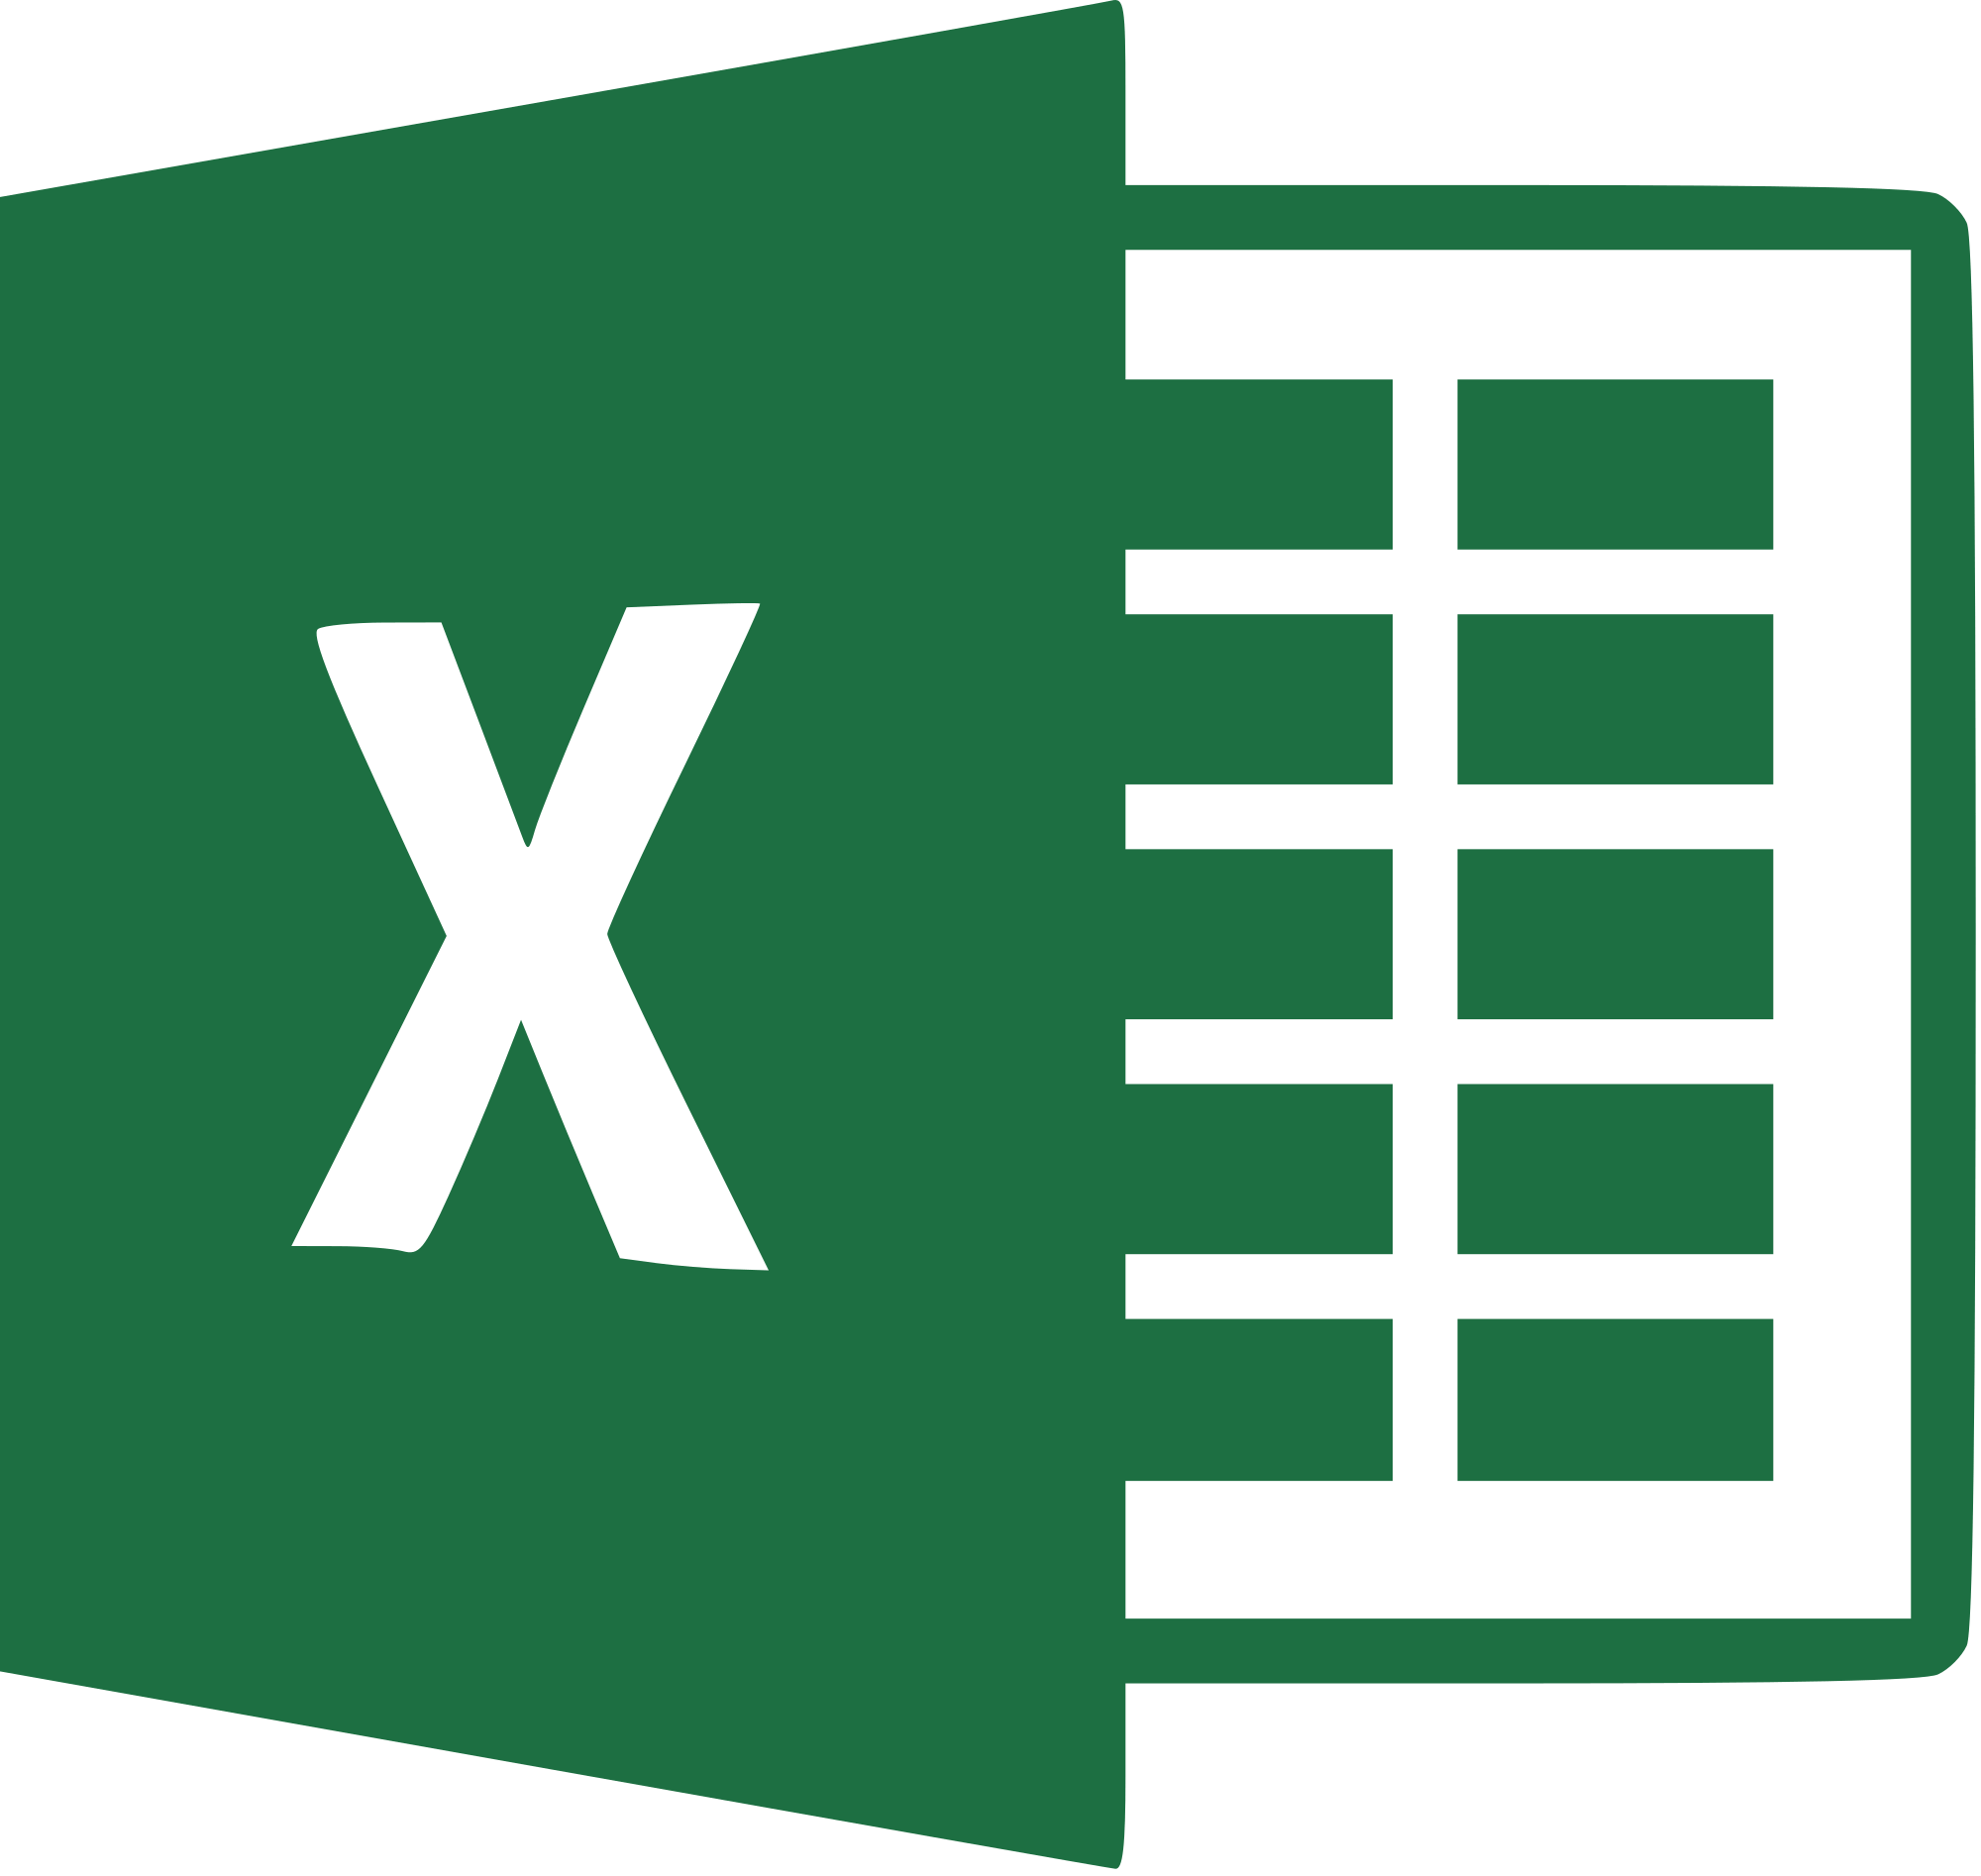 Microsoft Office Excel Logo - File:Microsoft Office Excel (2013–present).svg - Wikimedia Commons